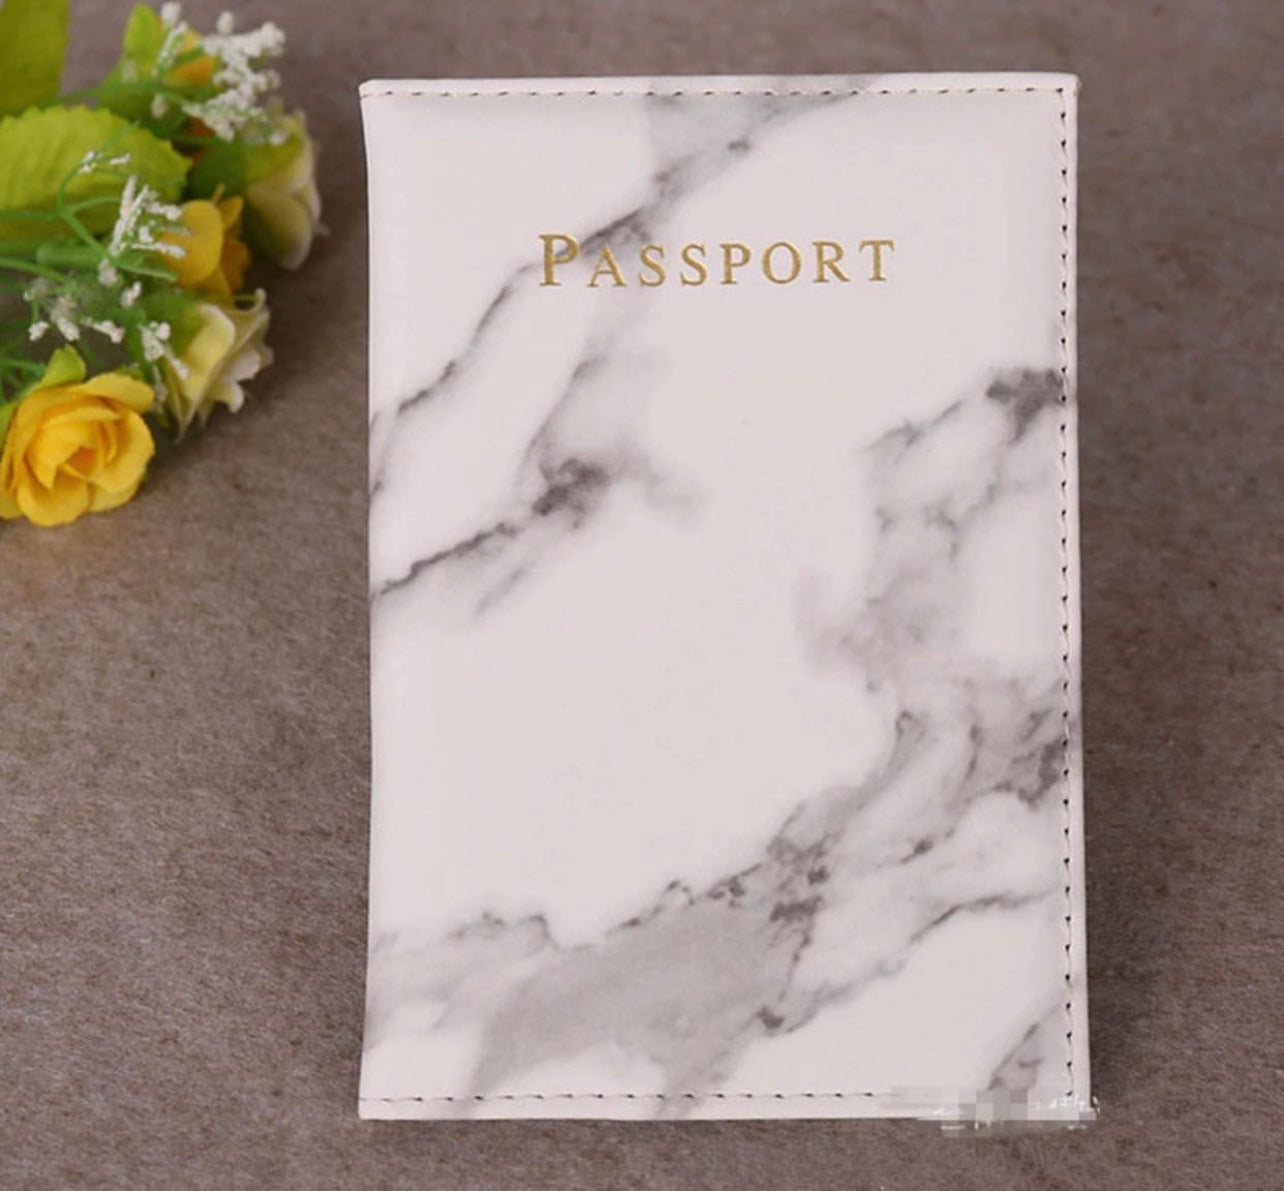 Marble Passport covers